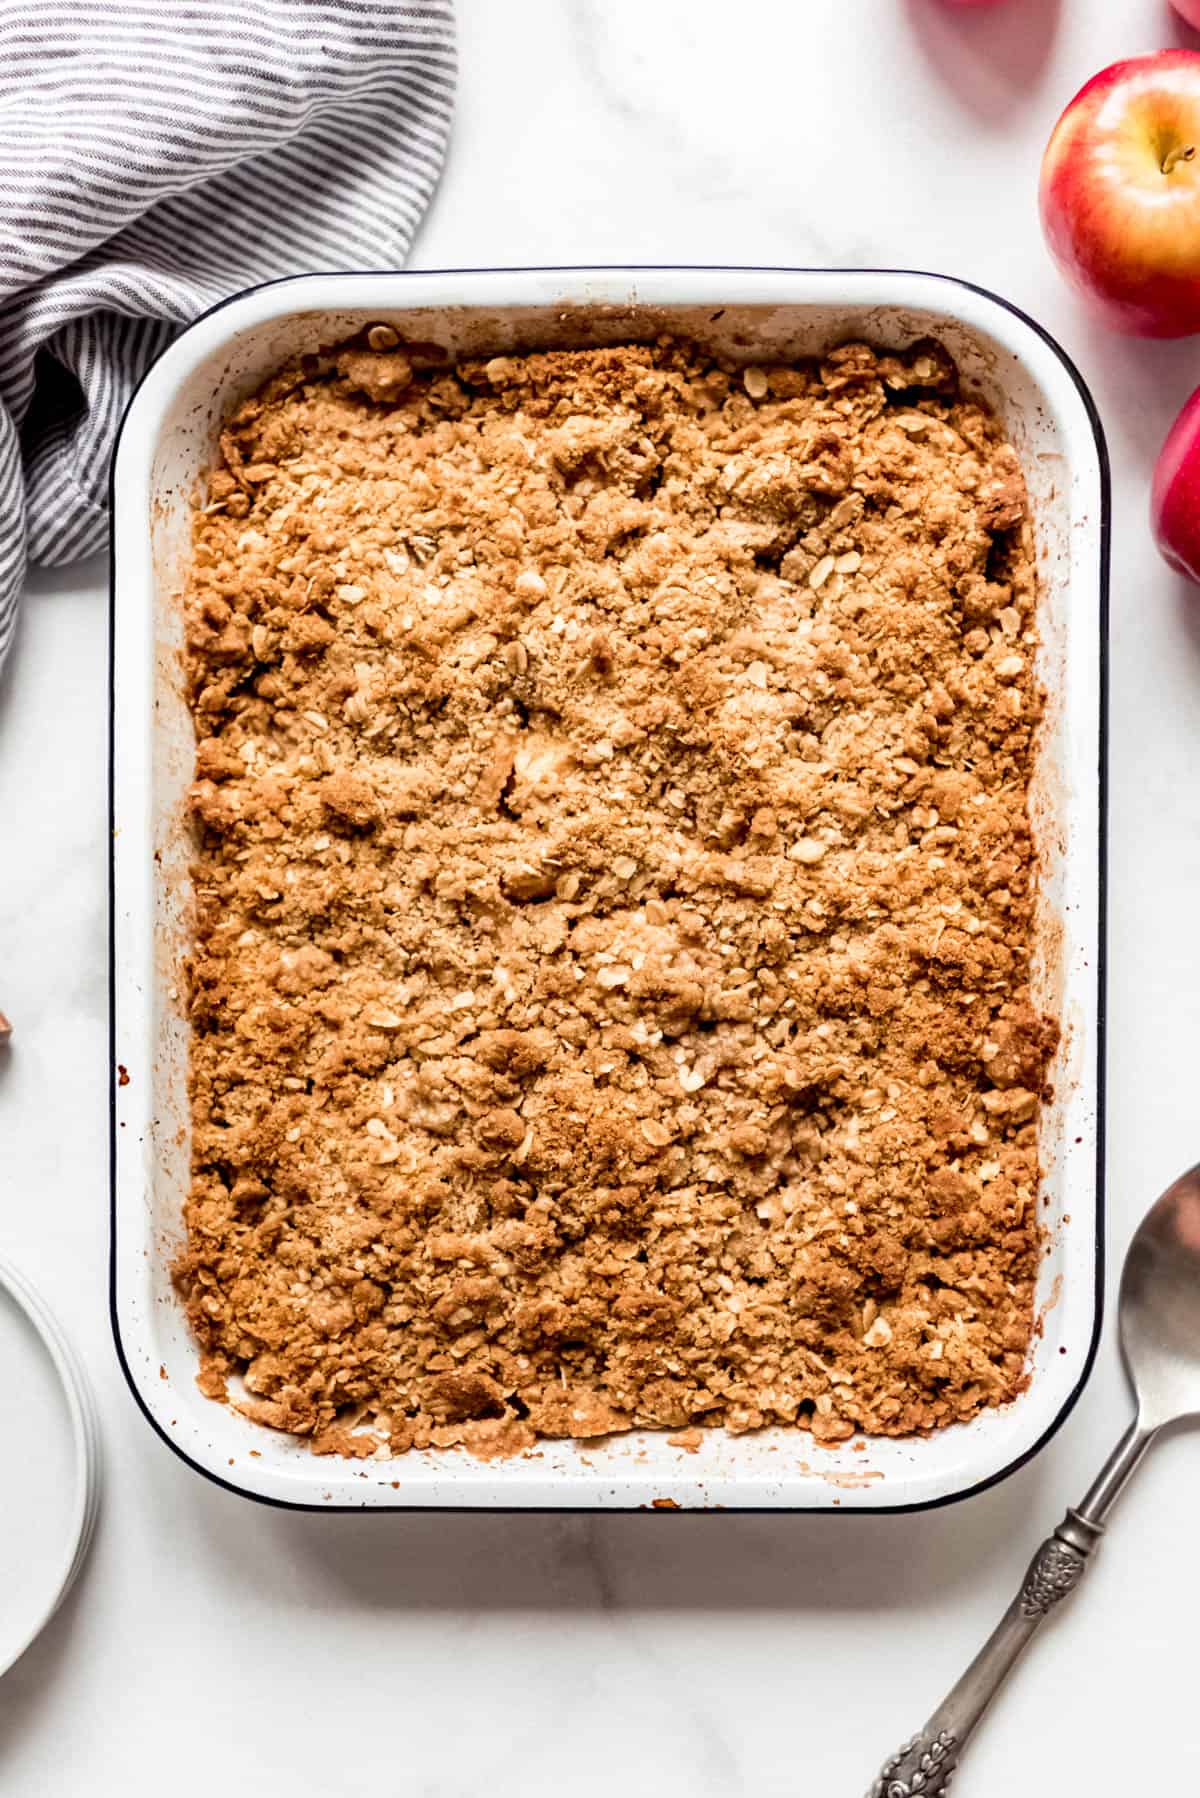 A baked apple crisp next to red apples.